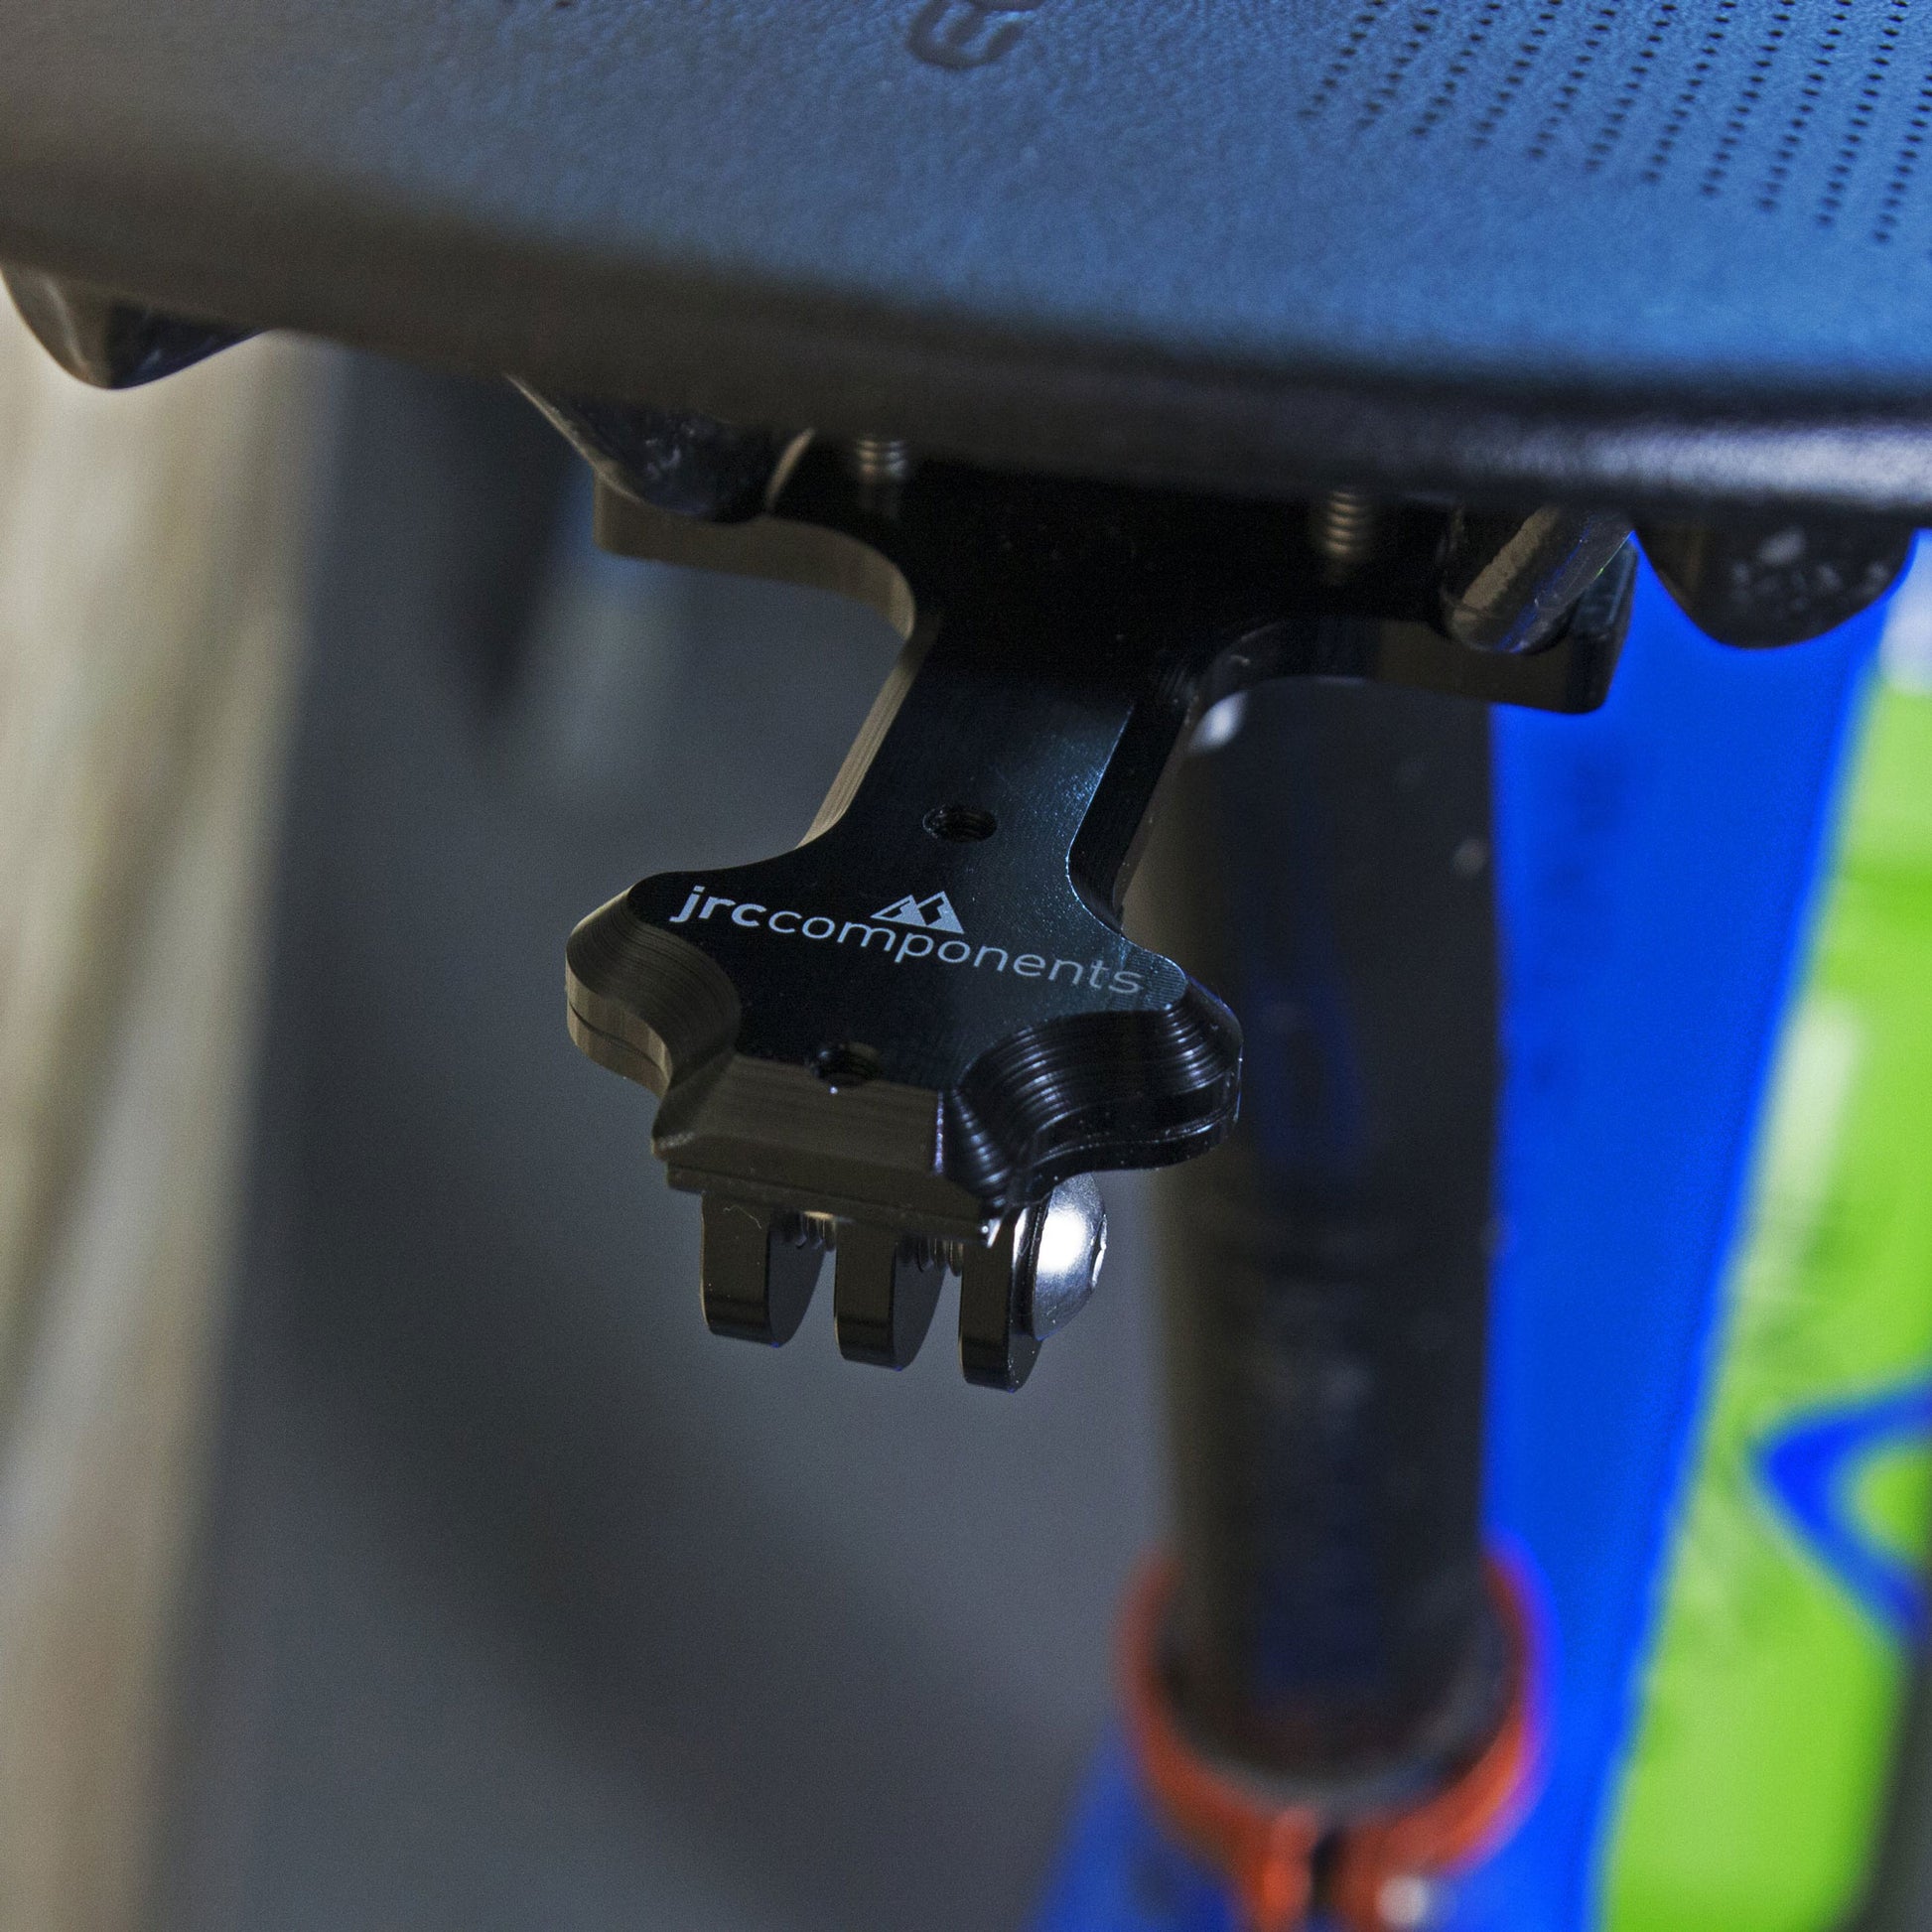  Black saddle rail mount with adaptor piece for rear lights and action cameras, fitted to saddle rail, overview.